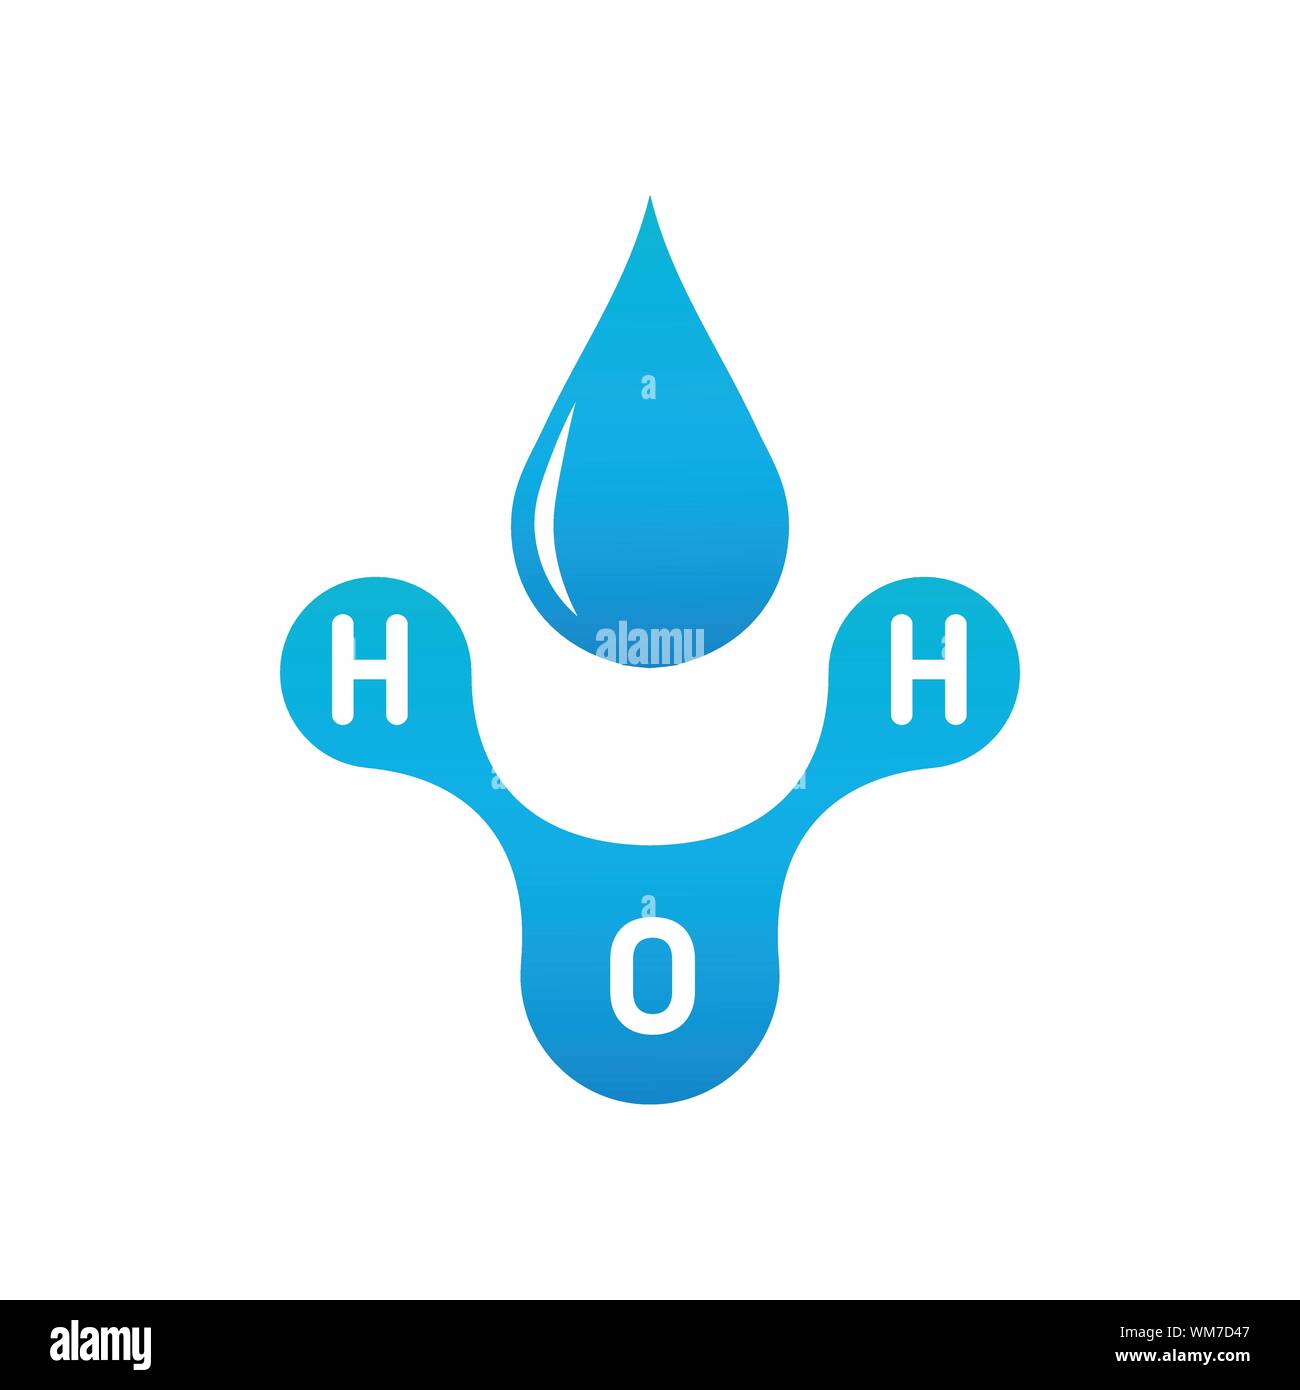 Chemistry model of water molecule H2O scientific elements. Integrated particles hydrogen and oxygen natural inorganic compound. vector illustration Stock Vector